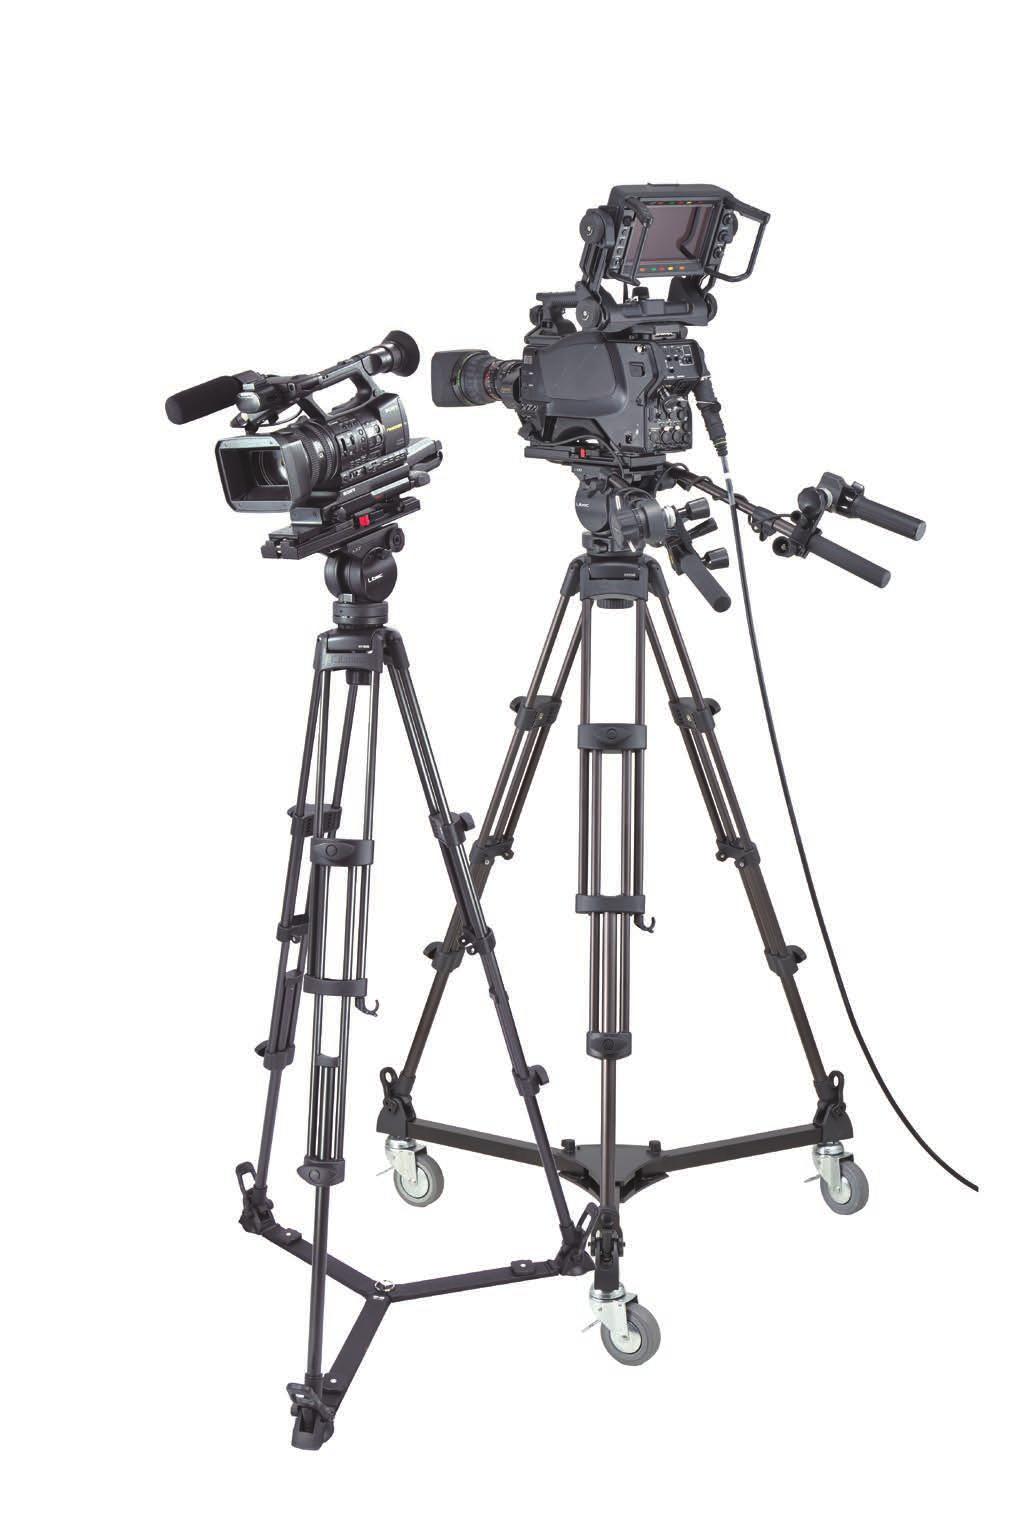 LX Heads & Tripod Systems Outstanding payload and rigidity with extremely smooth torque performance at the